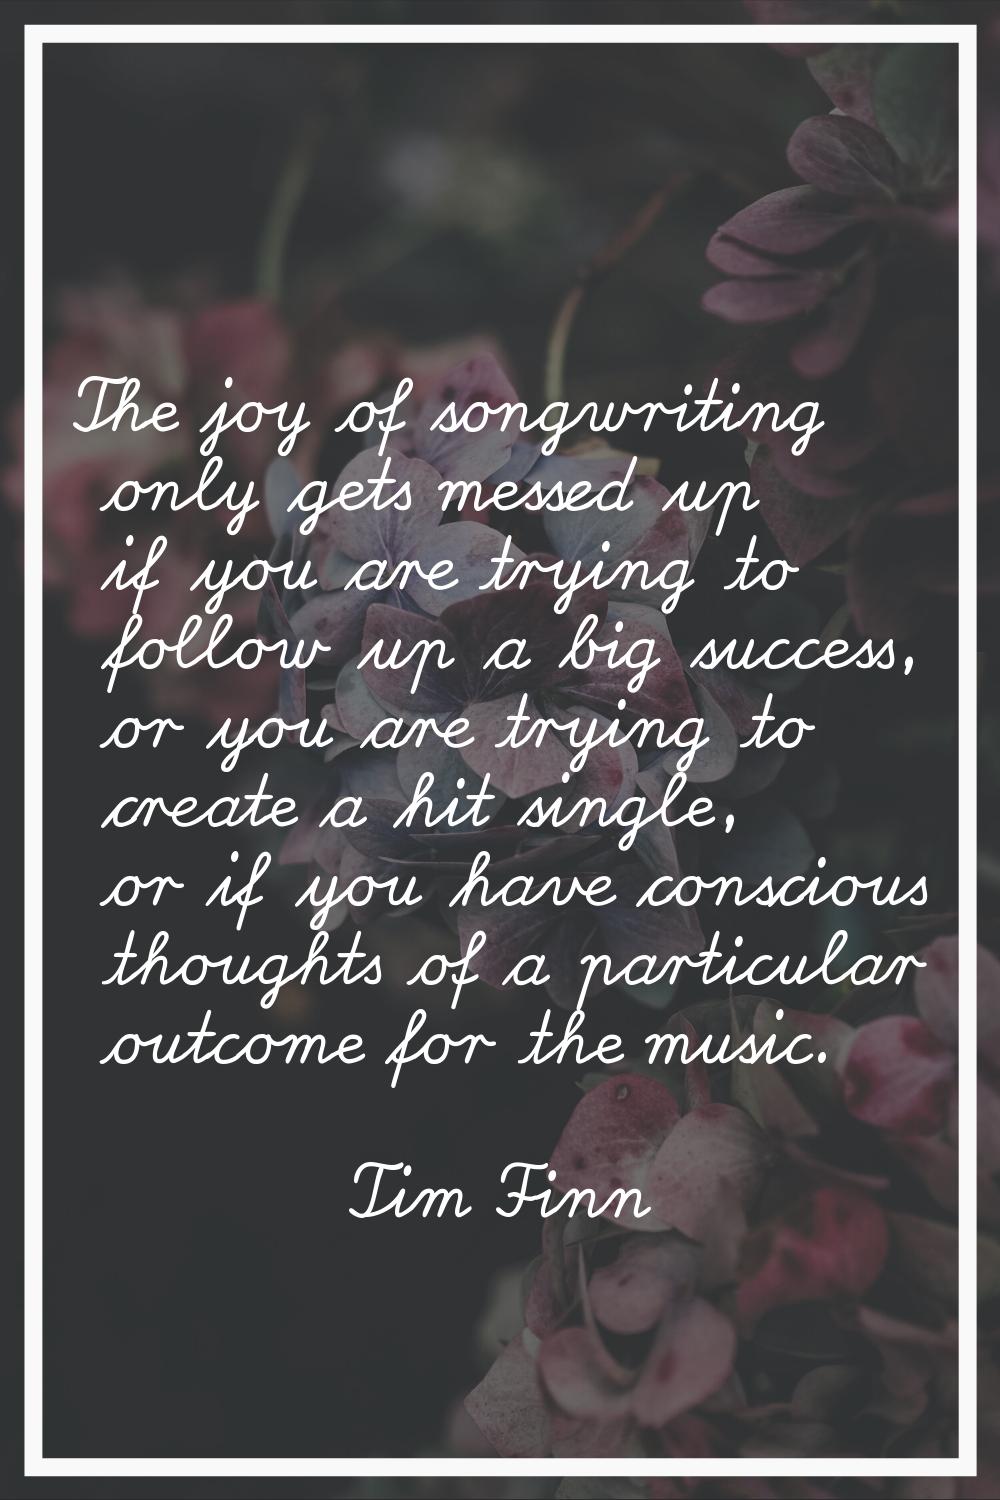 The joy of songwriting only gets messed up if you are trying to follow up a big success, or you are